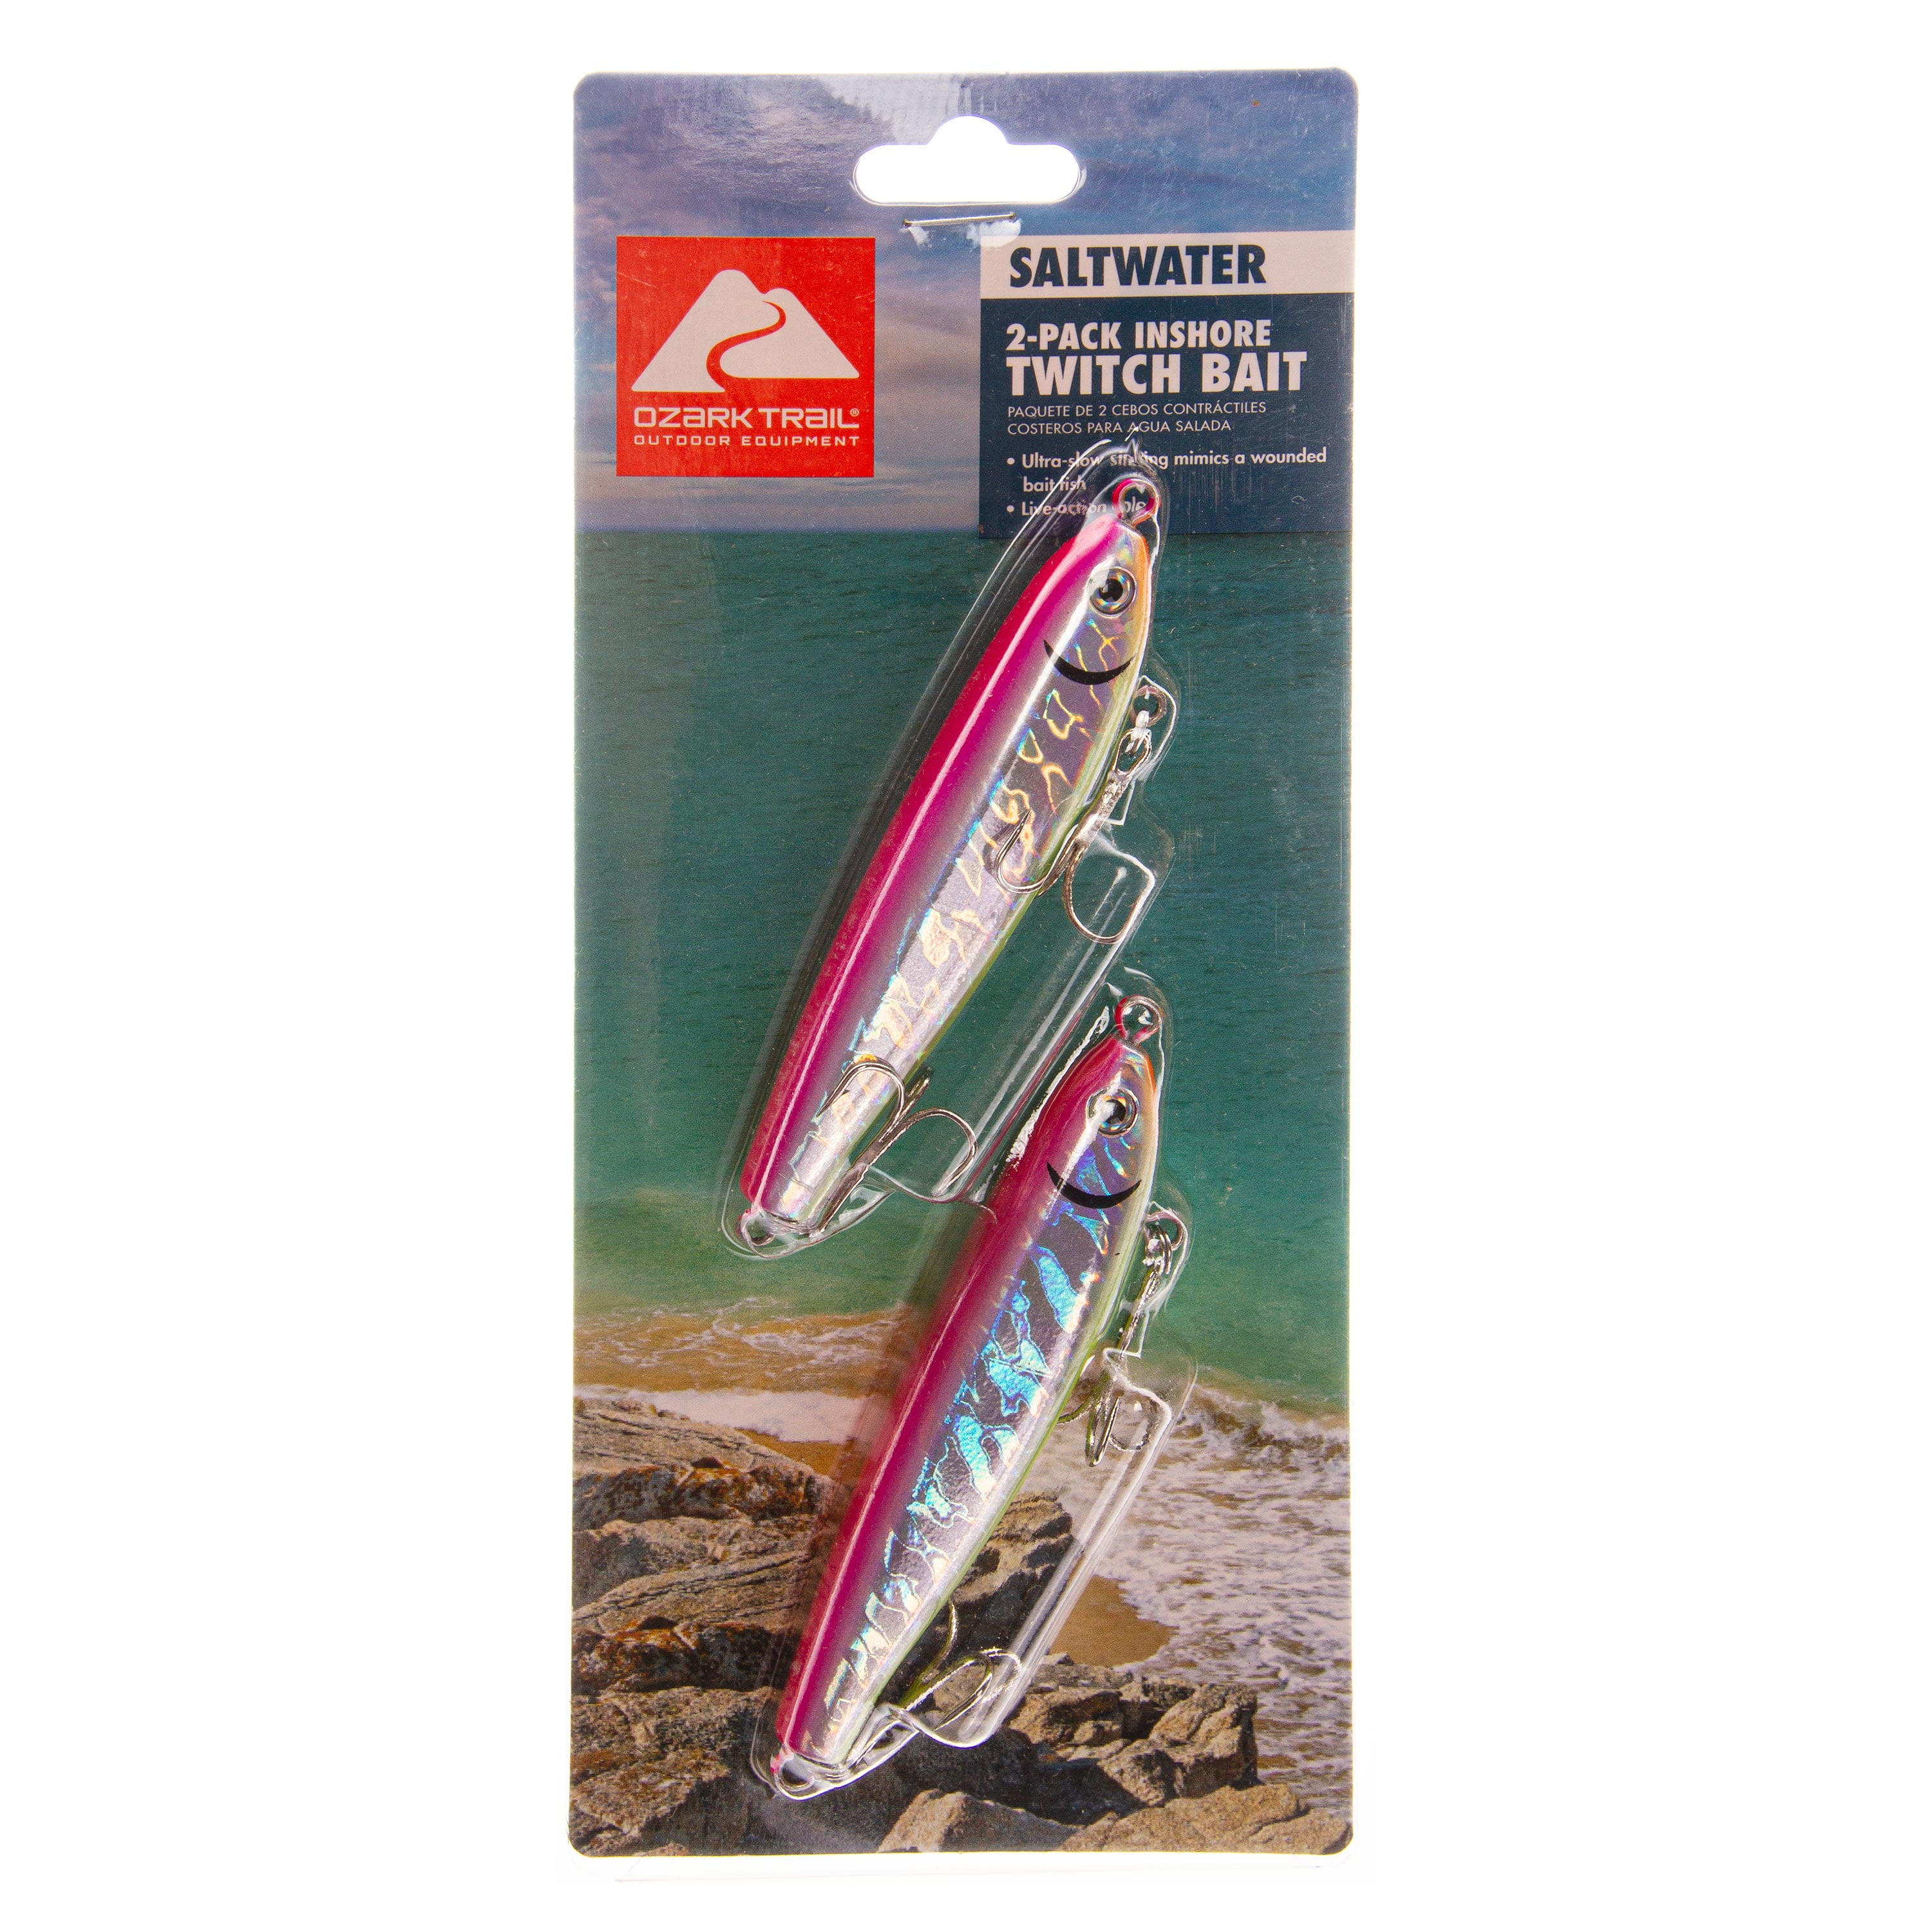 Ozark Trails Hard Plastic Saltwater Inshore Fishing Lure, 2-pack. Painted  in fish attracting colors